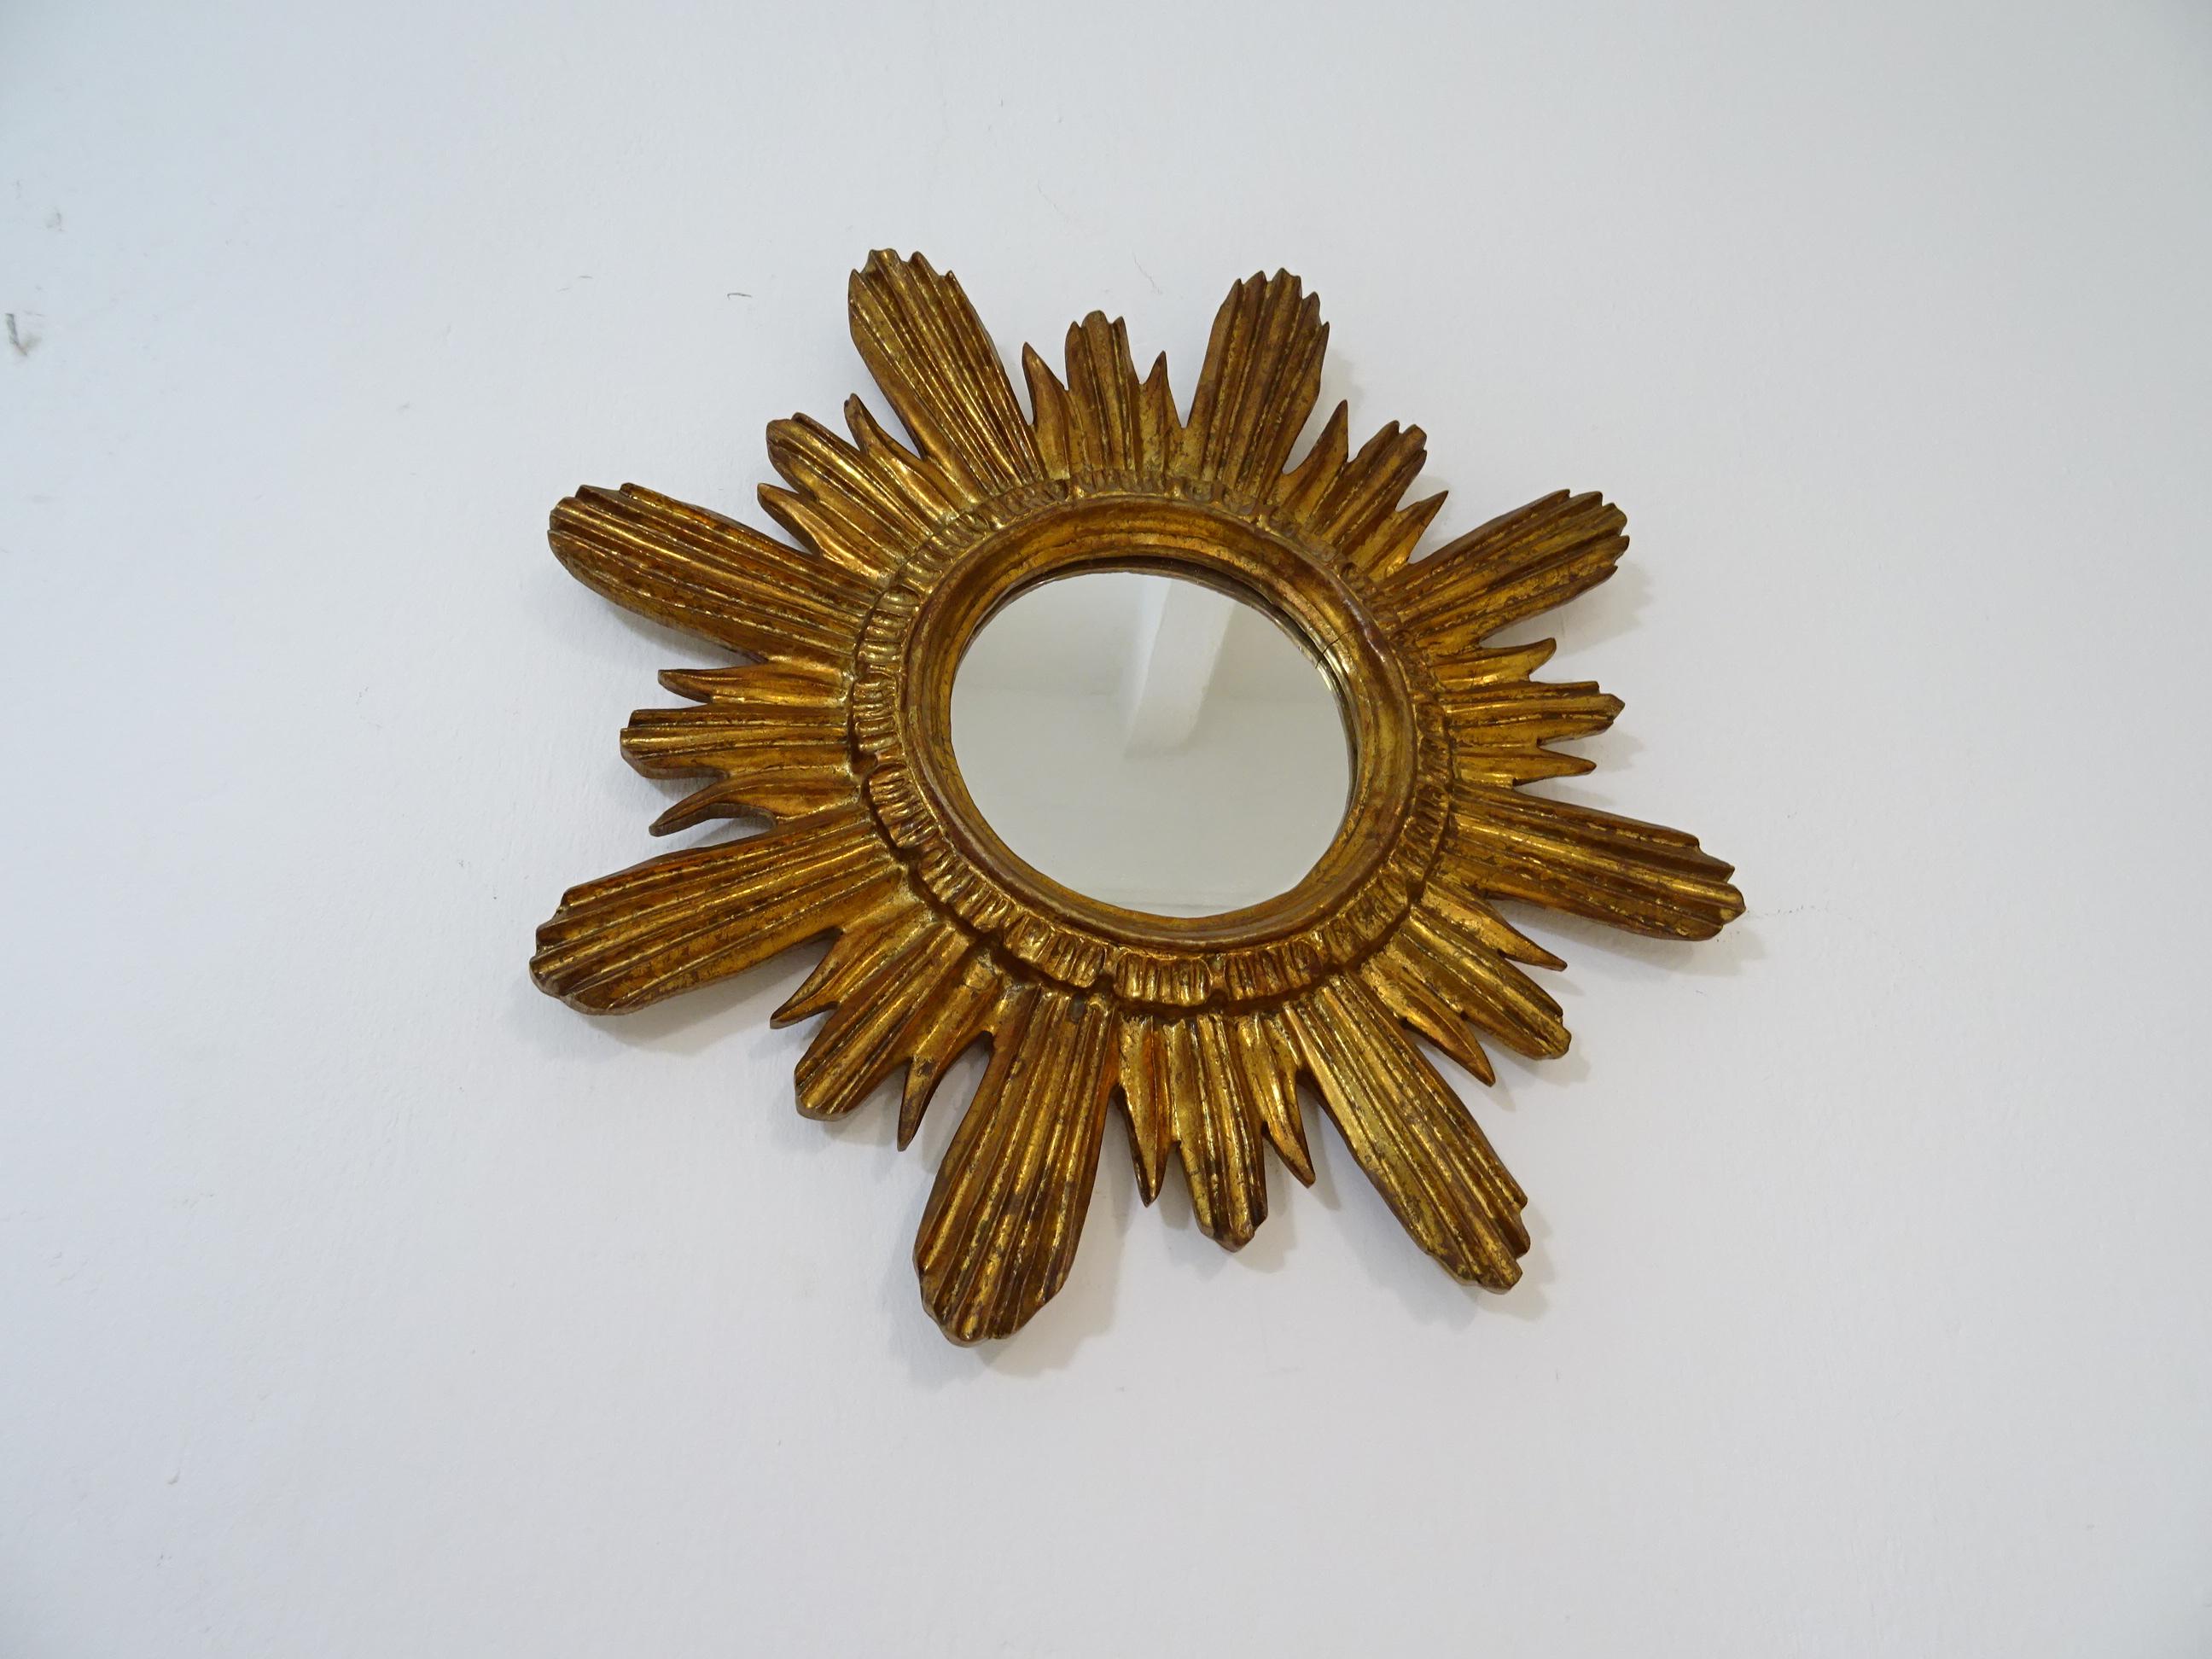 Beautiful French wood gold starburst. Mirror in perfect shape. Free priority UPS shipping from Italy, no custom fees.